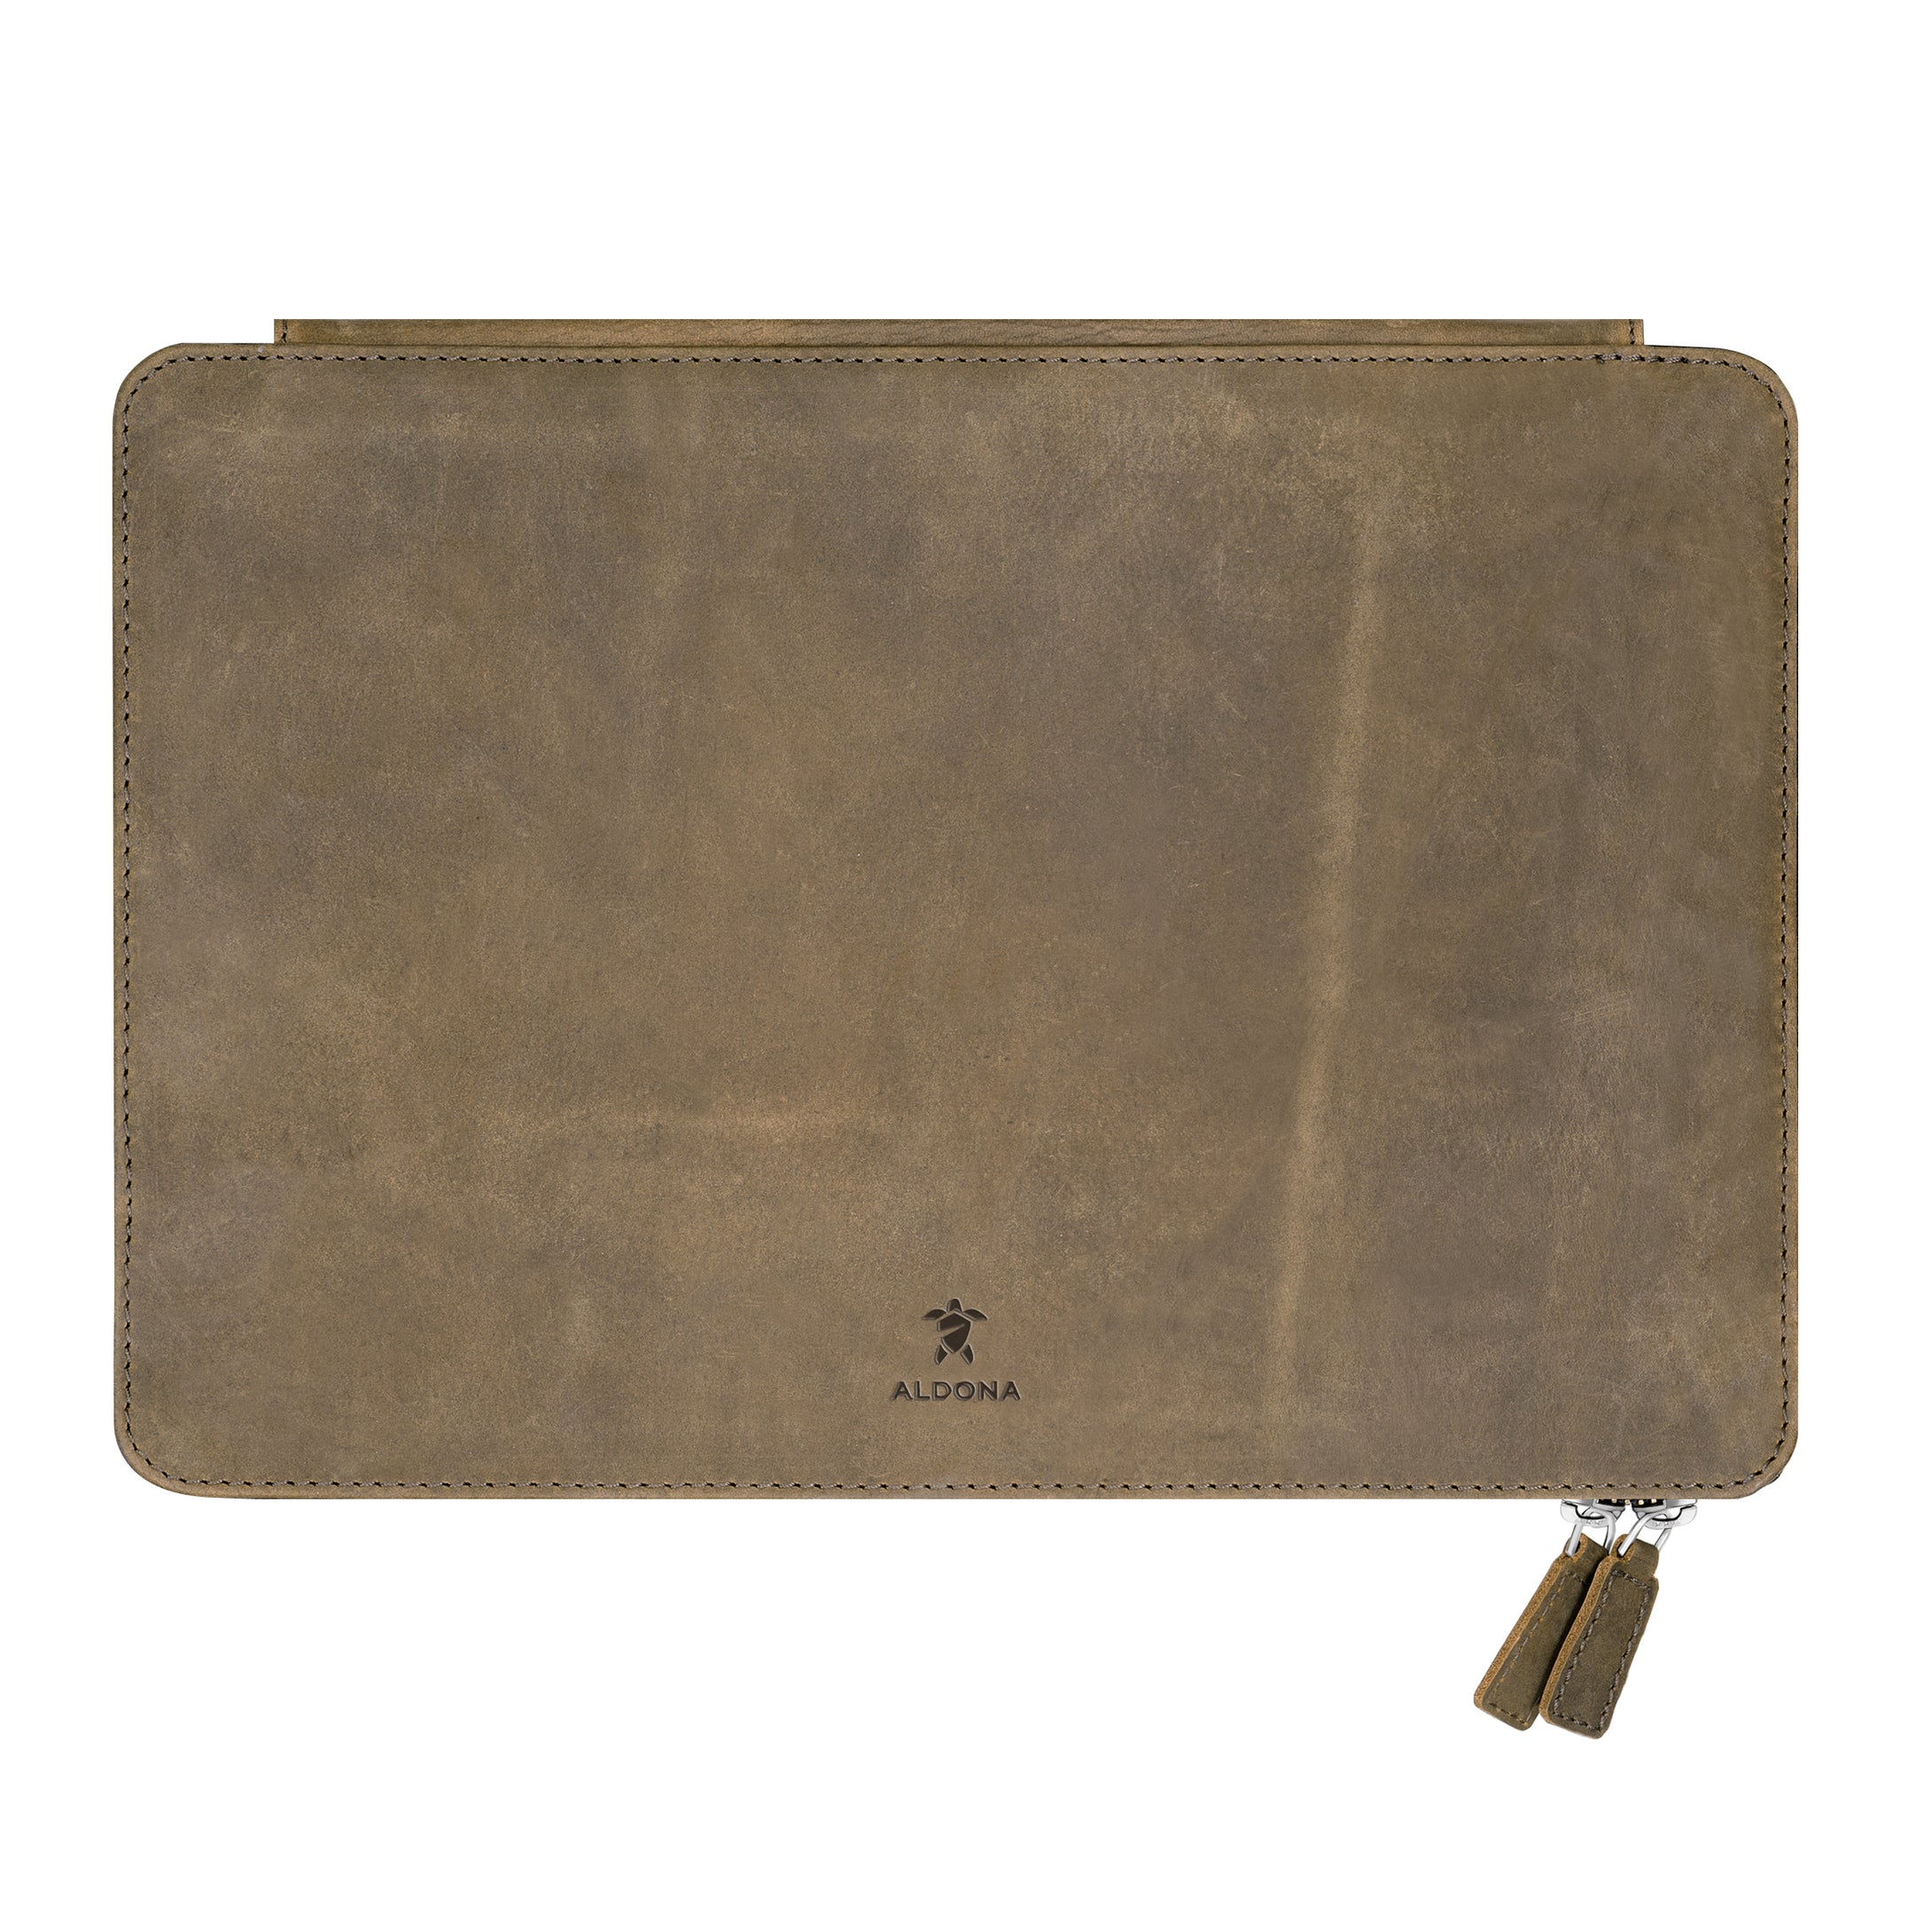 Megaleio Leather Sleeve for 15 Inch MacBook Pro - Burnt Tobacco Colour